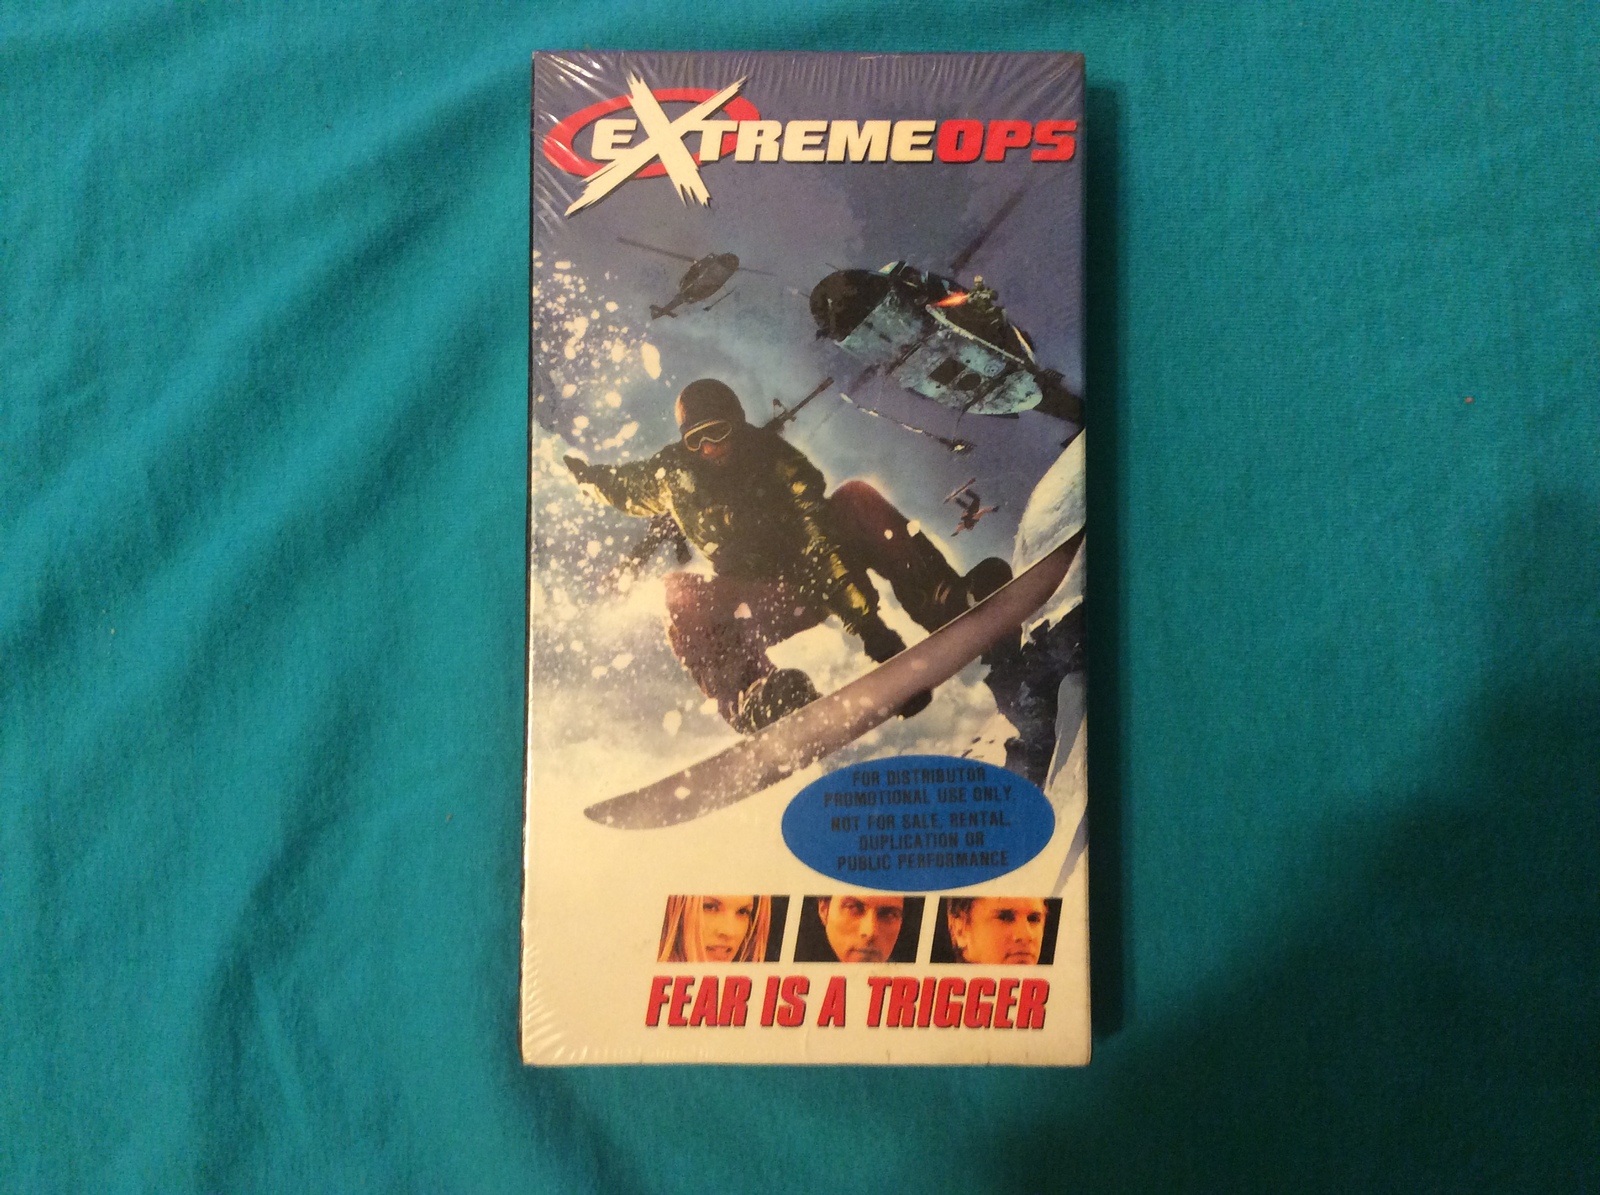 Primary image for EXTREME OPS - FEAR IS A TRIGGER - VHS - BRAND NEW - SEALED - Free Shipping